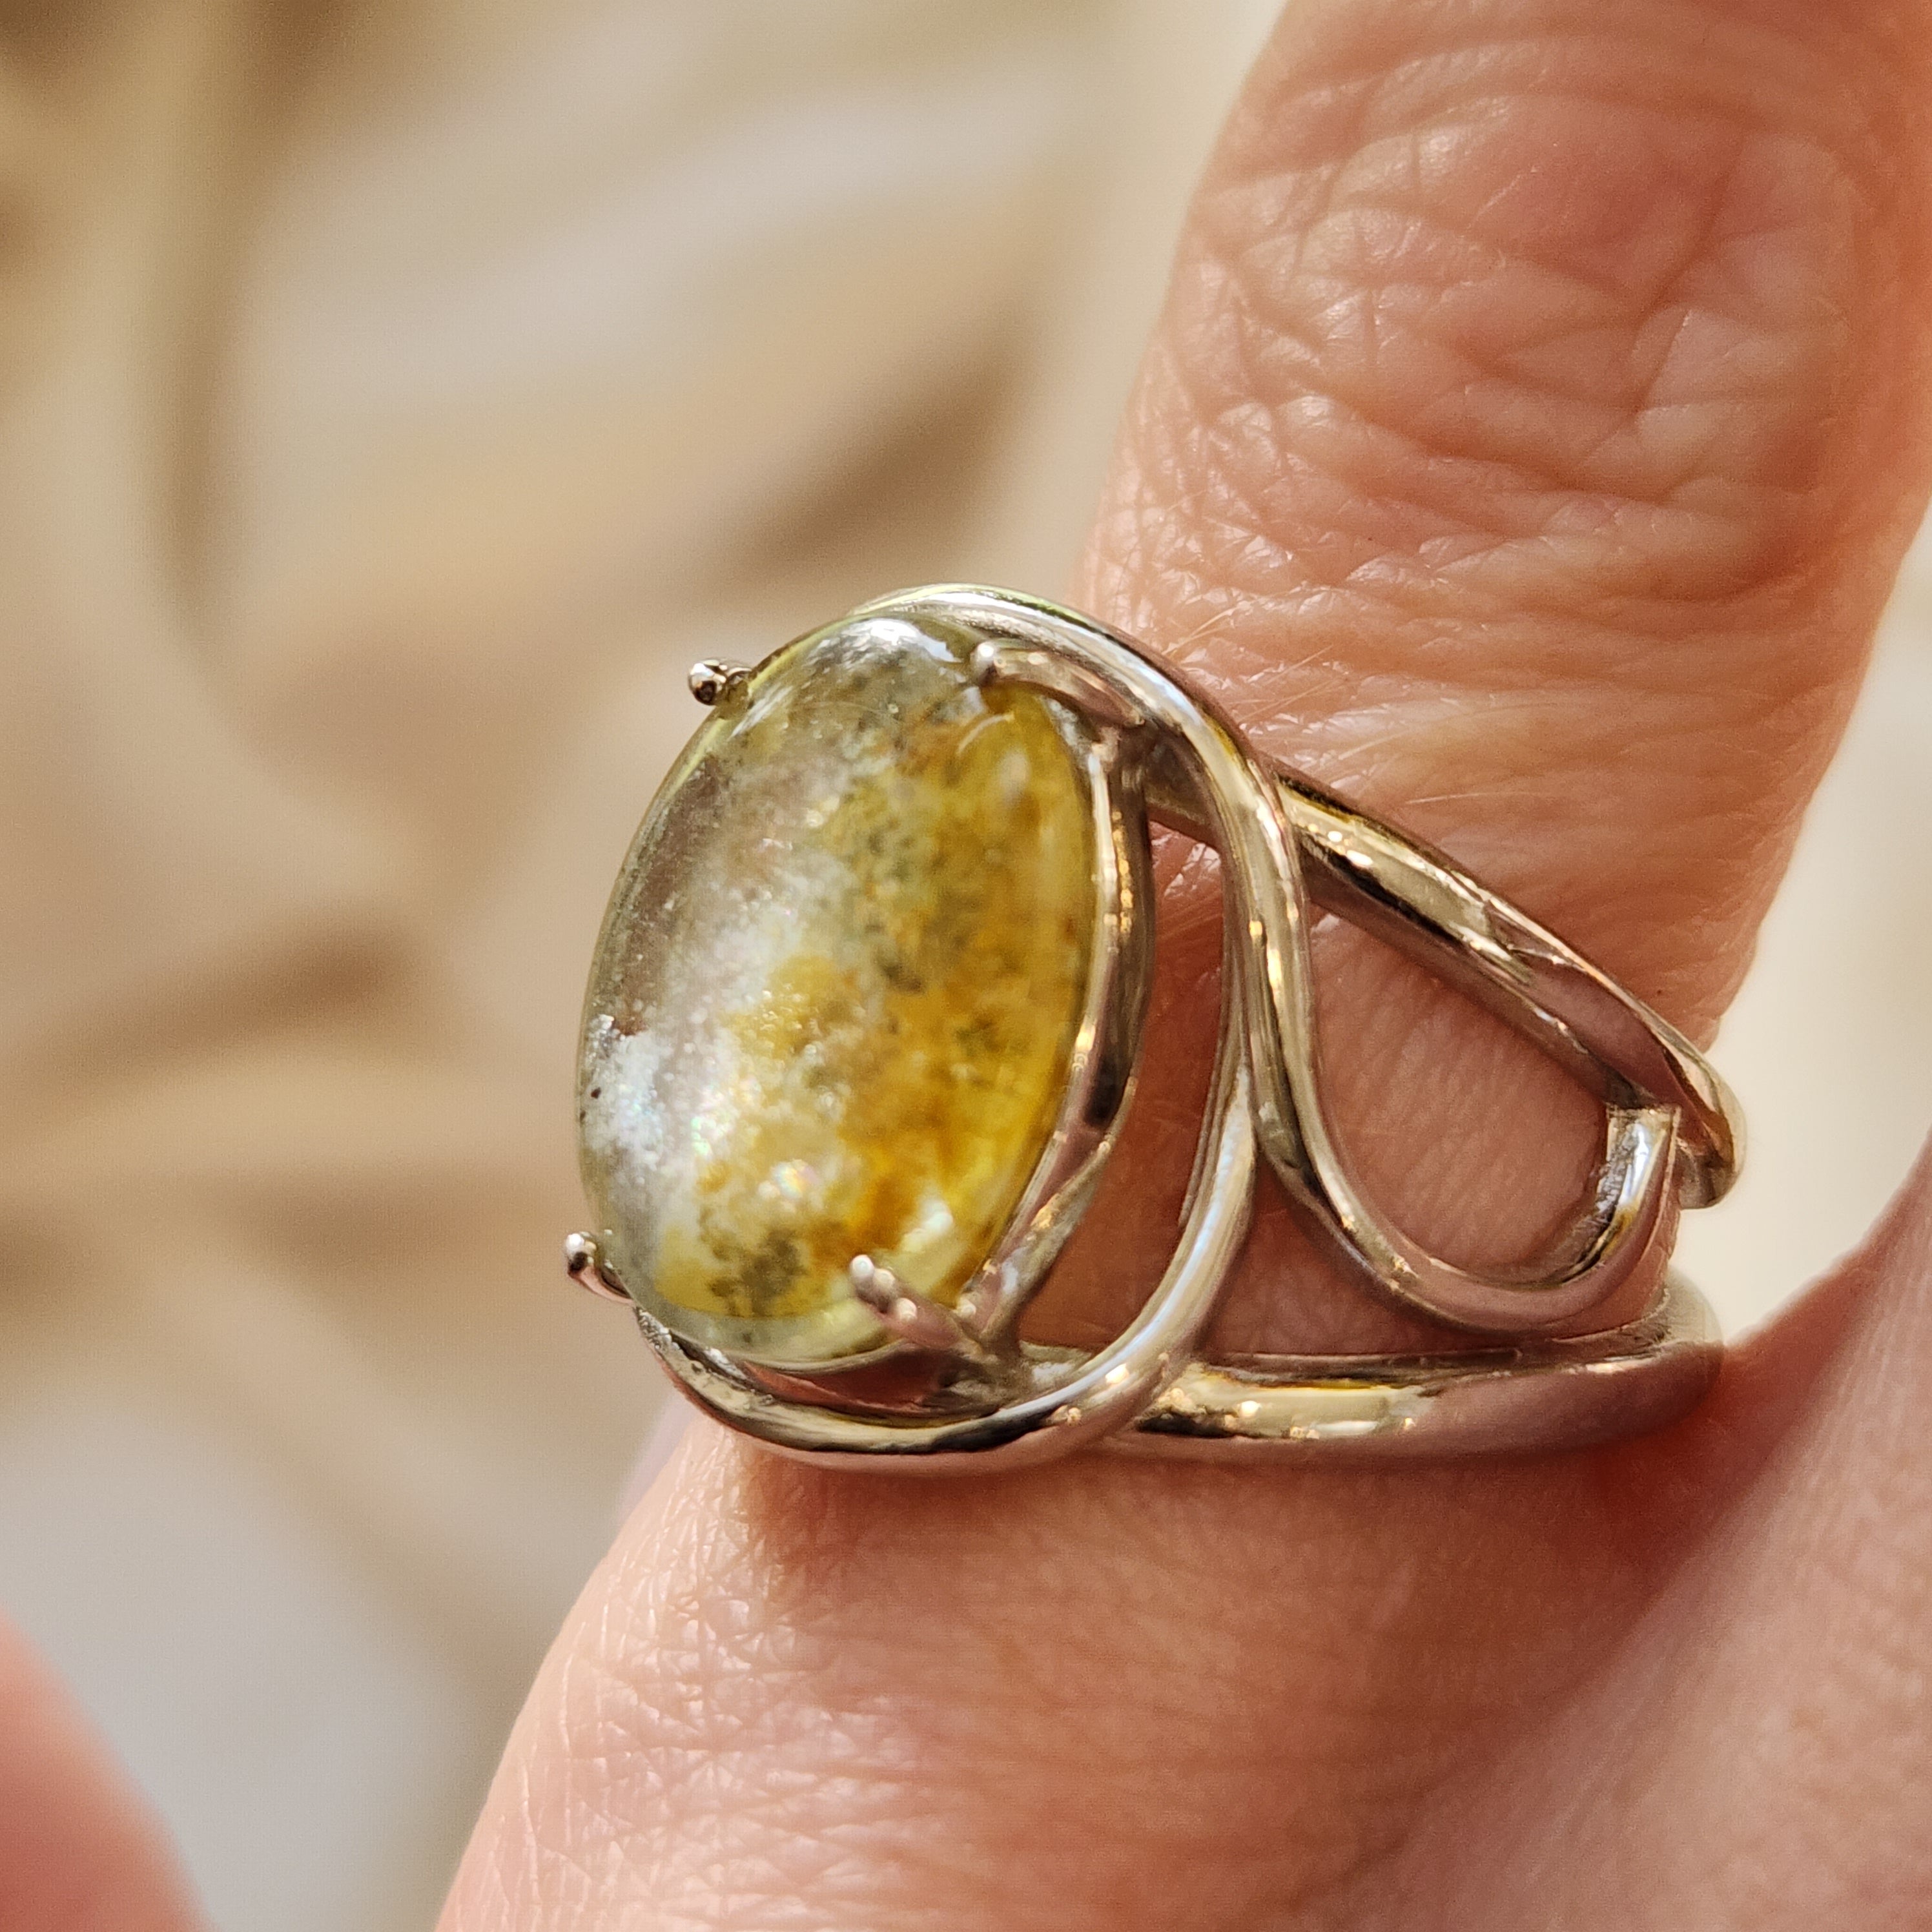 Aquamarine with Limonite Finger Cuff Adjustable Ring .925 Sterling Silver for Improving Communication and Healing